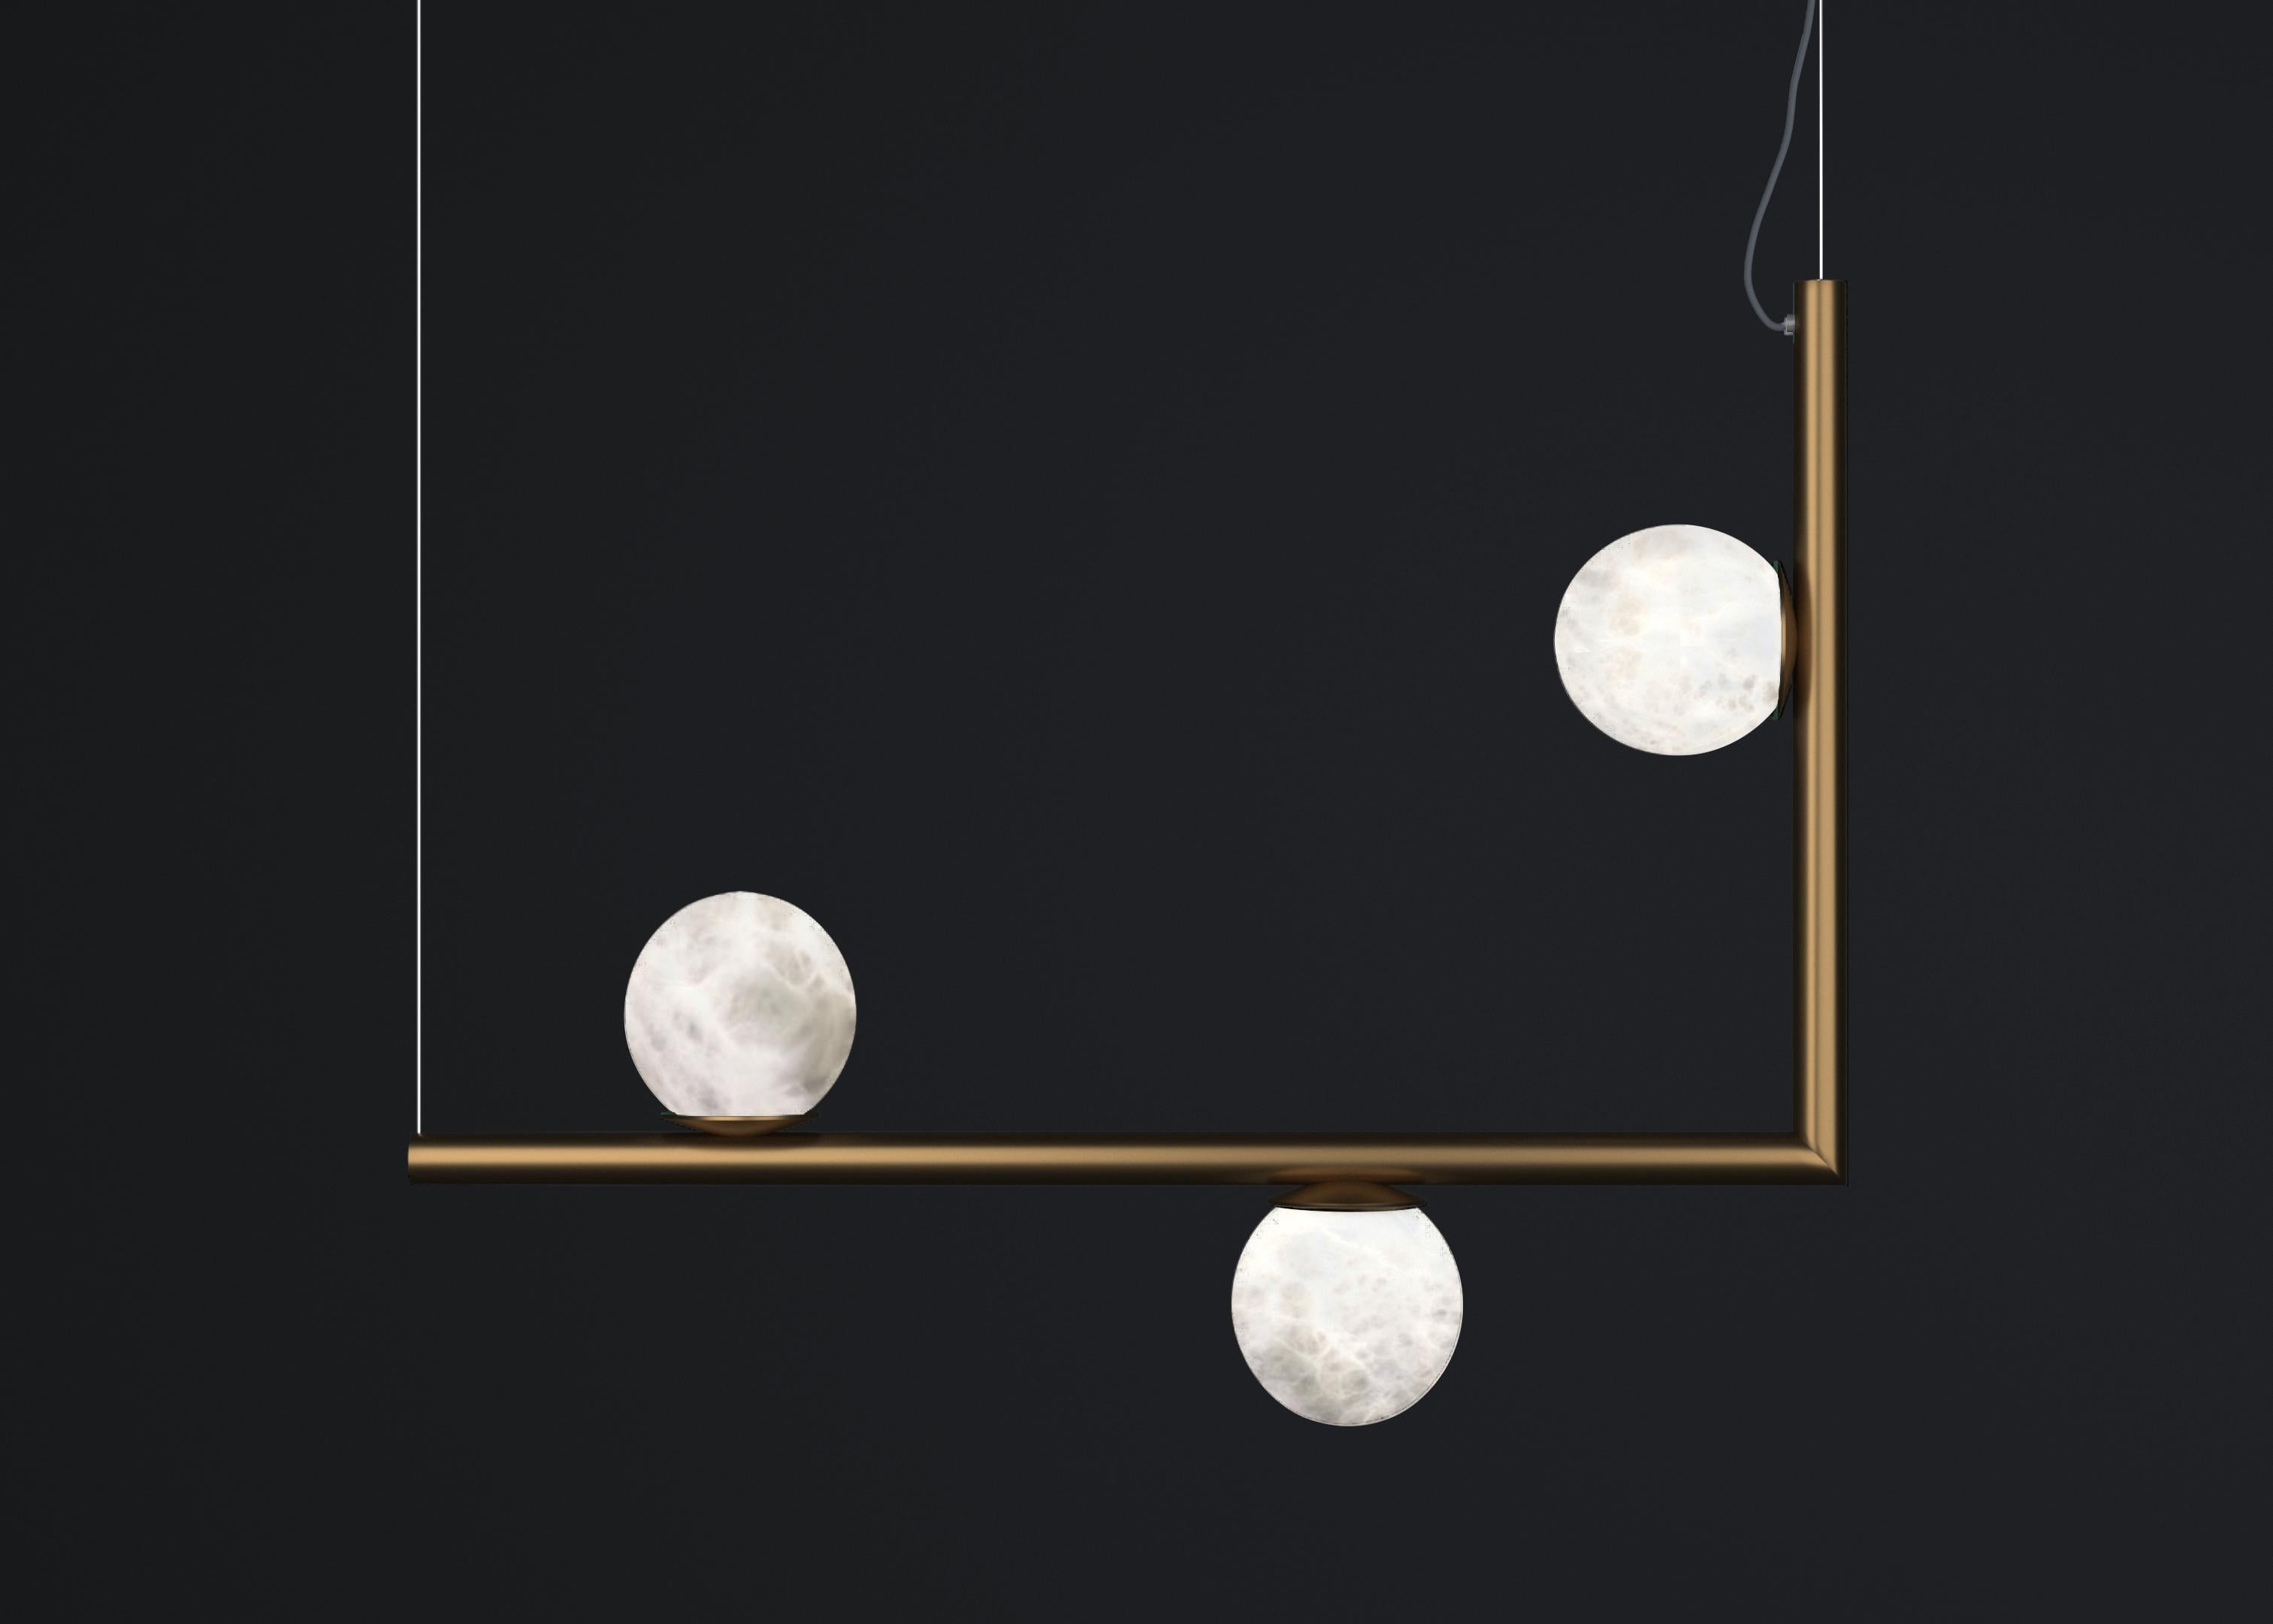 Ofione 1 Bronze Pendant Lamp by Alabastro Italiano
Dimensions: D 15 x W 85 x H 64 cm.
Materials: White alabaster and bronze.

Available in different finishes: Shiny Silver, Bronze, Brushed Brass, Ruggine of Florence, Brushed Burnished, Shiny Gold,